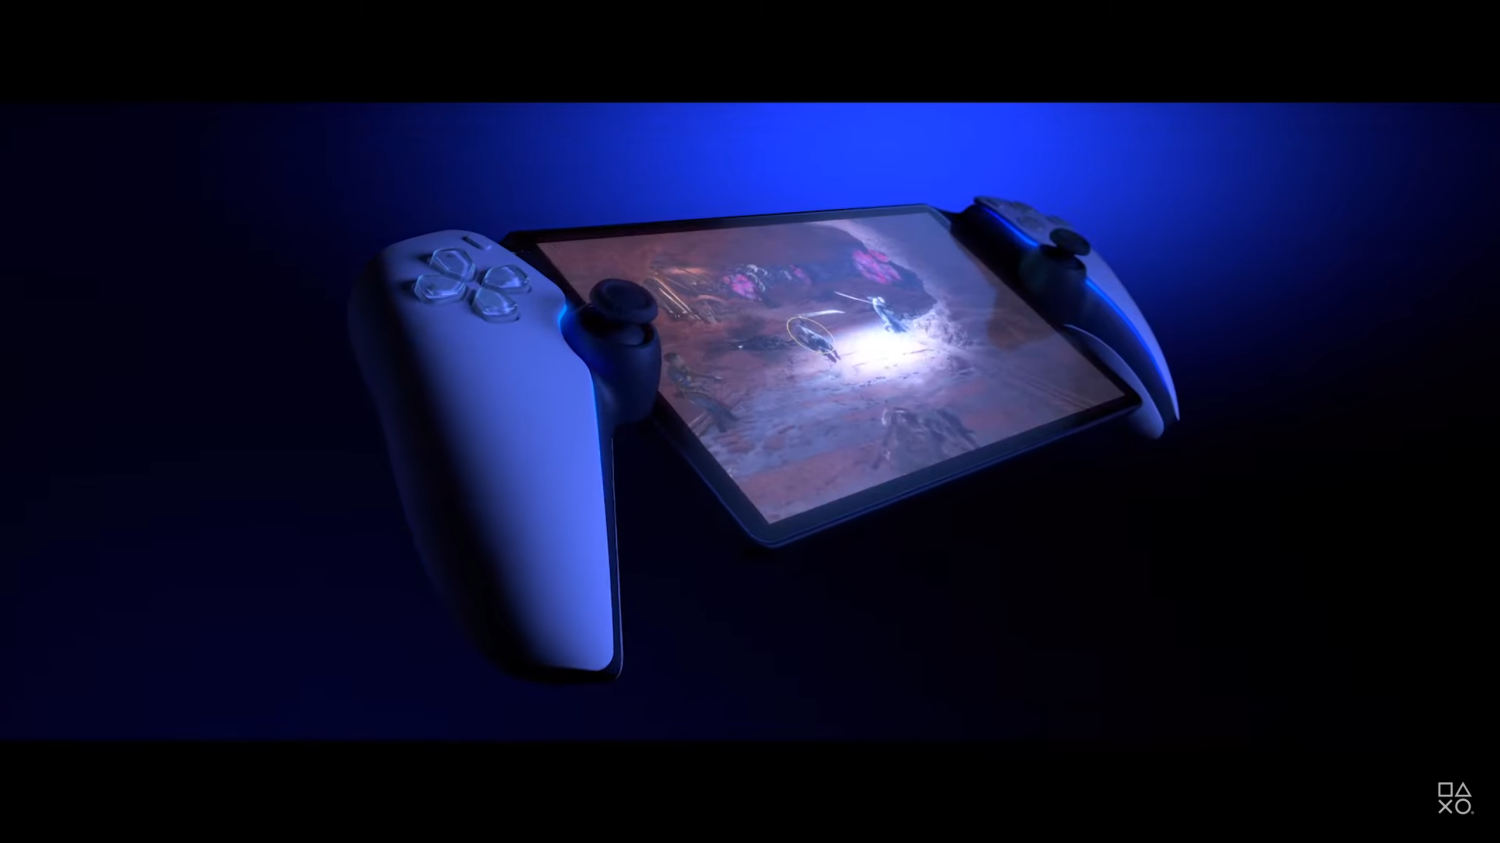 Sony reveals new PlayStation handheld, codenamed Project Q